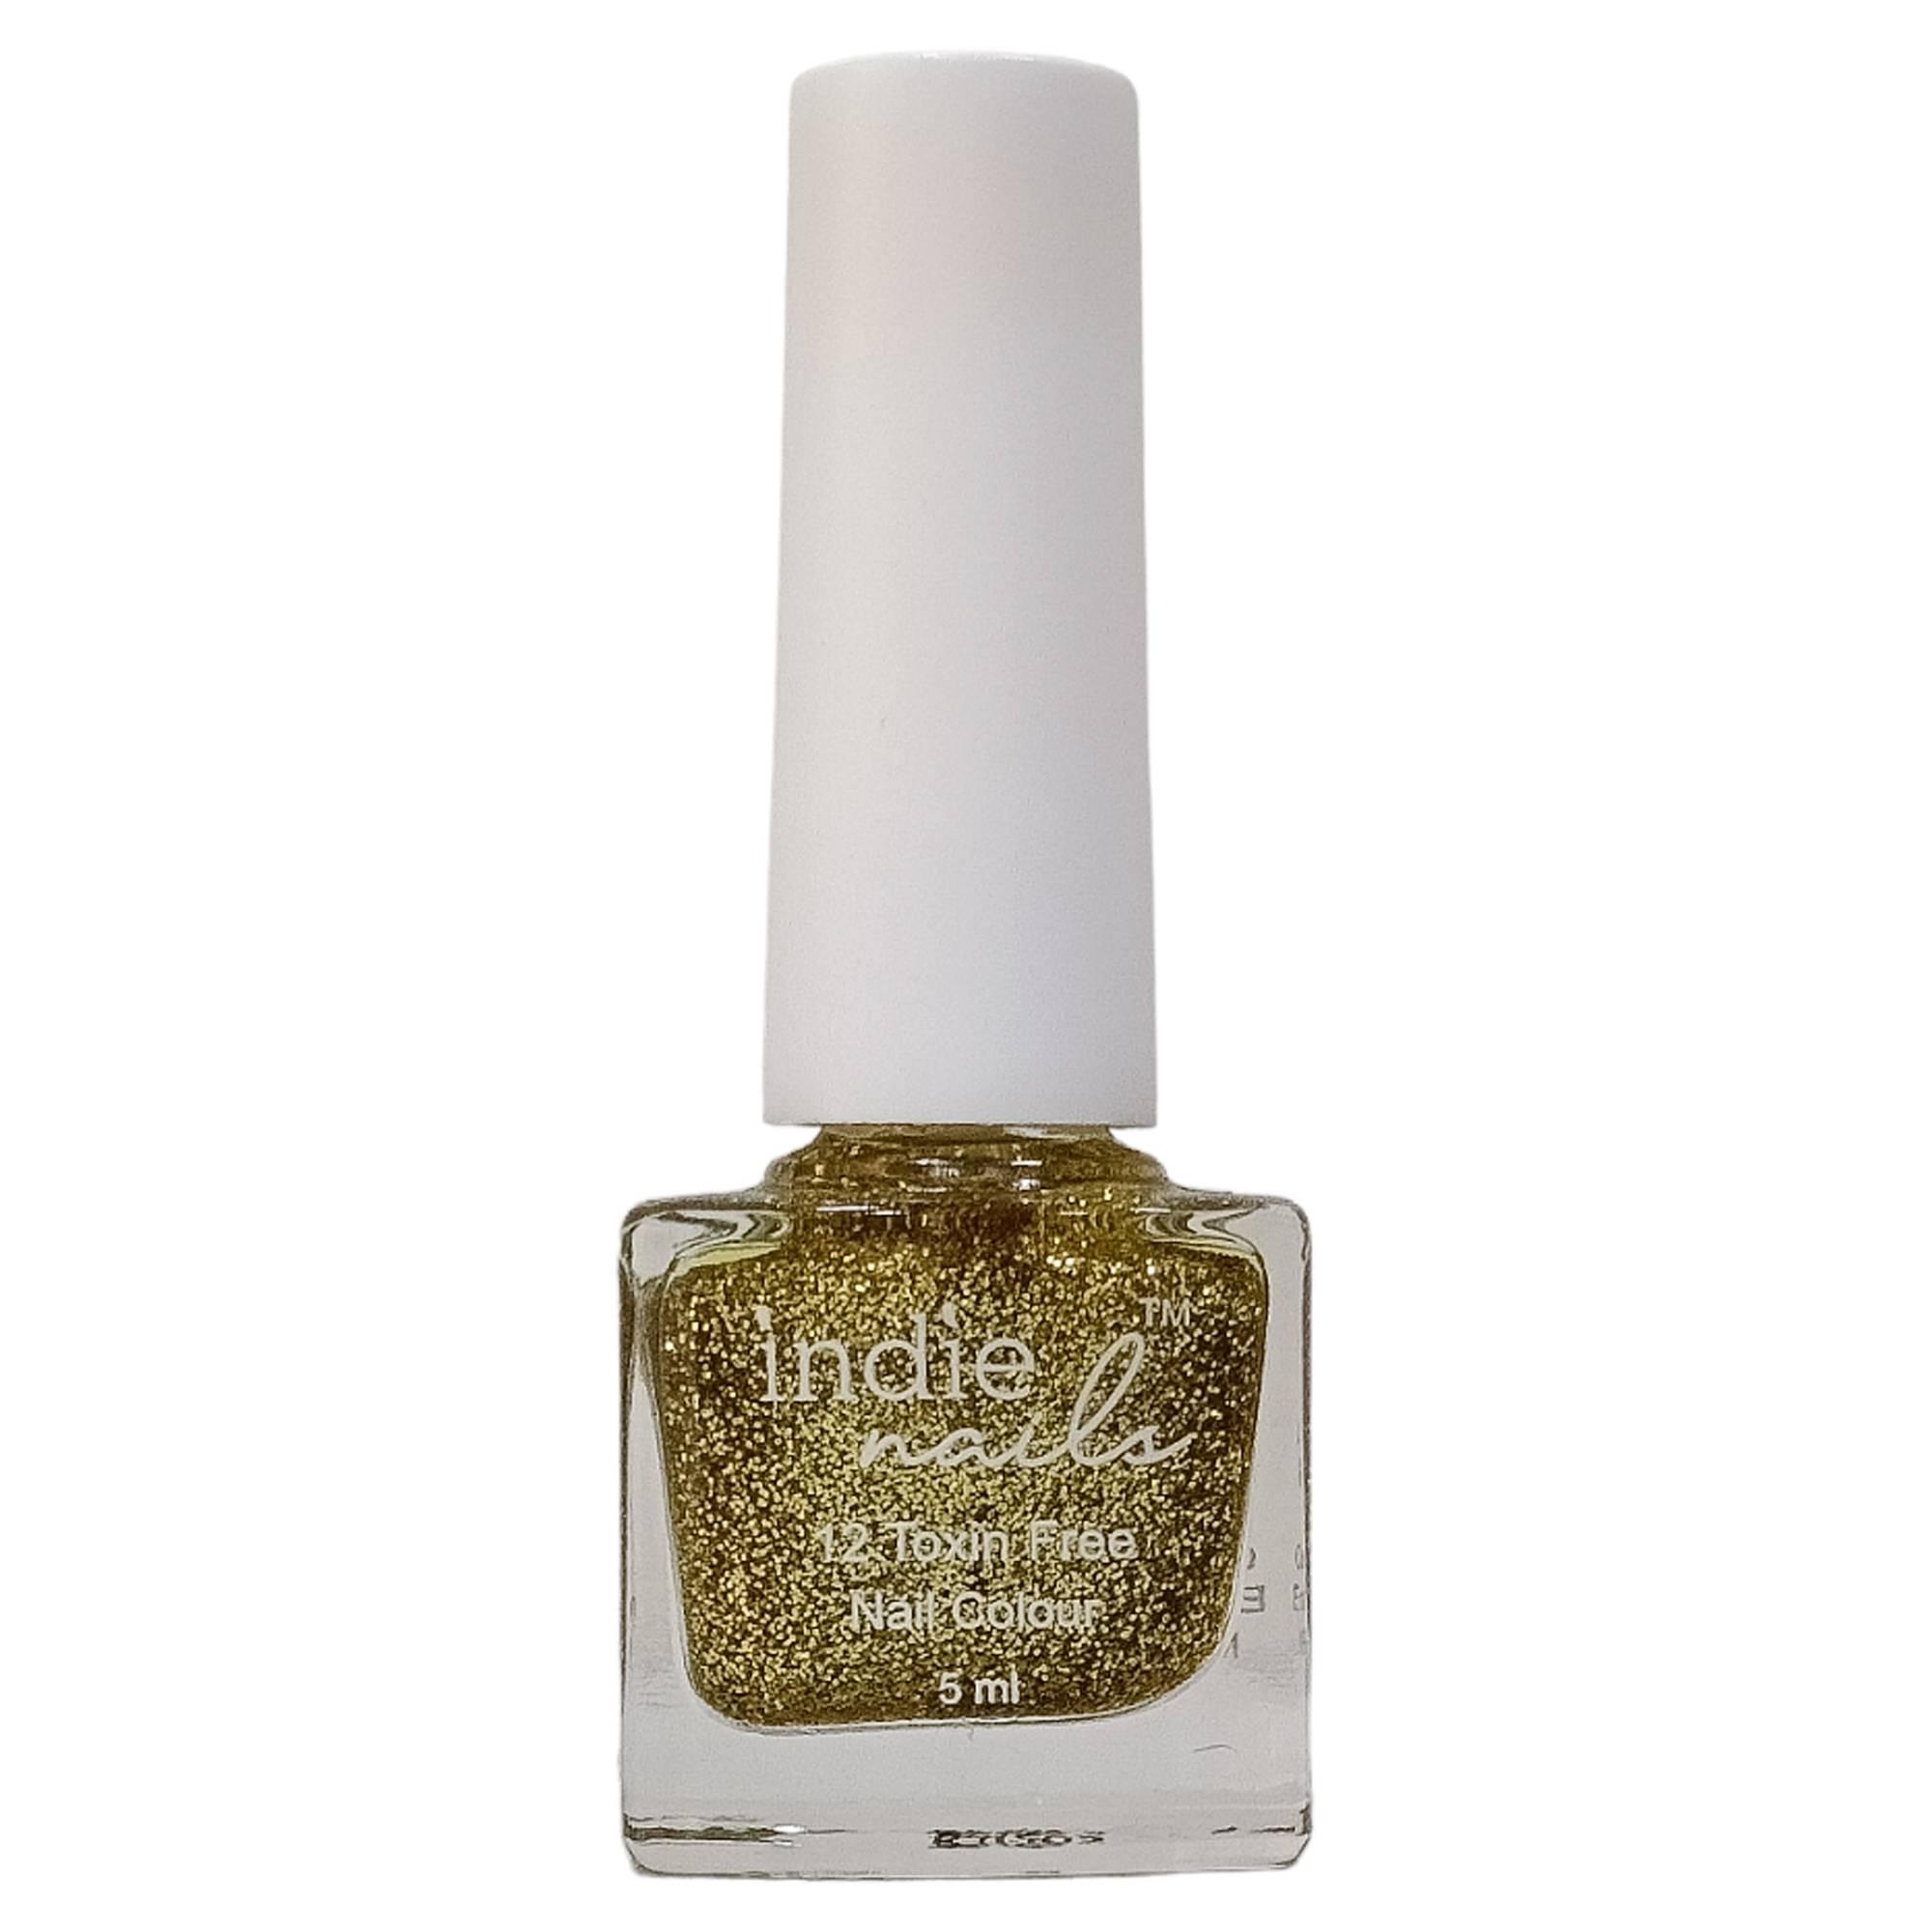 Orimes Luxurious Collection of Matte Golden Color Nail Lacquer Evening in  paris Golden - Price in India, Buy Orimes Luxurious Collection of Matte Golden  Color Nail Lacquer Evening in paris Golden Online